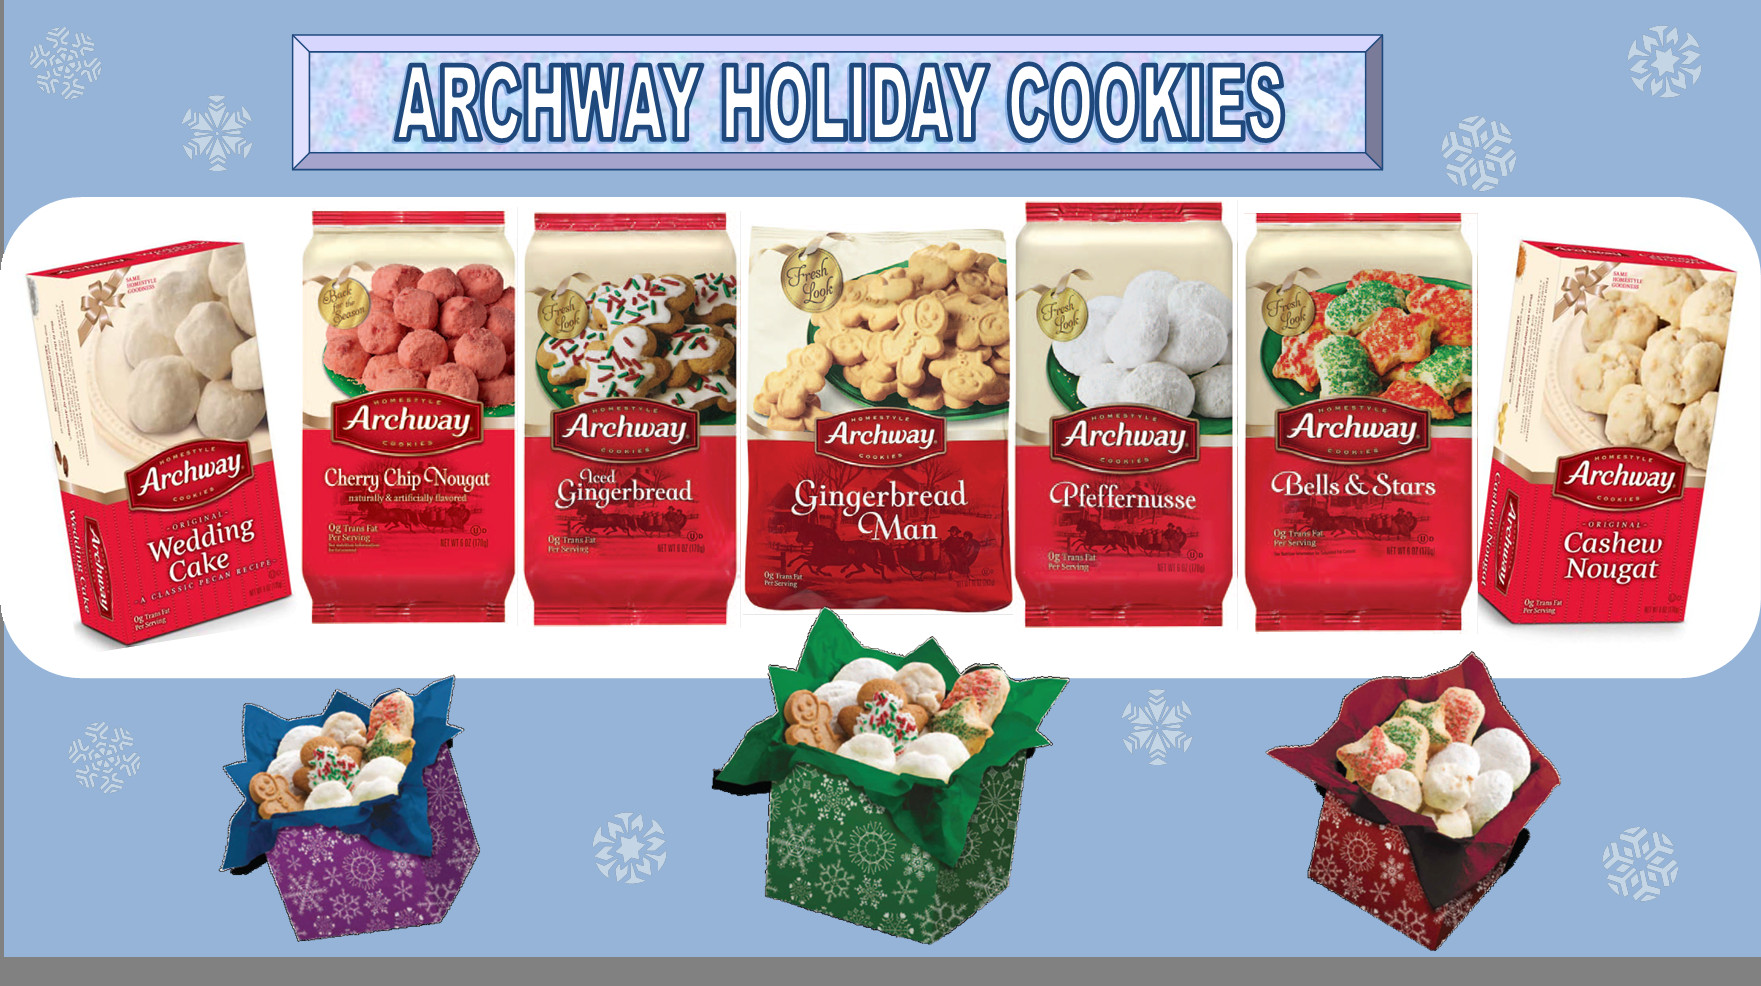 Archway Christmas Cookies
 News